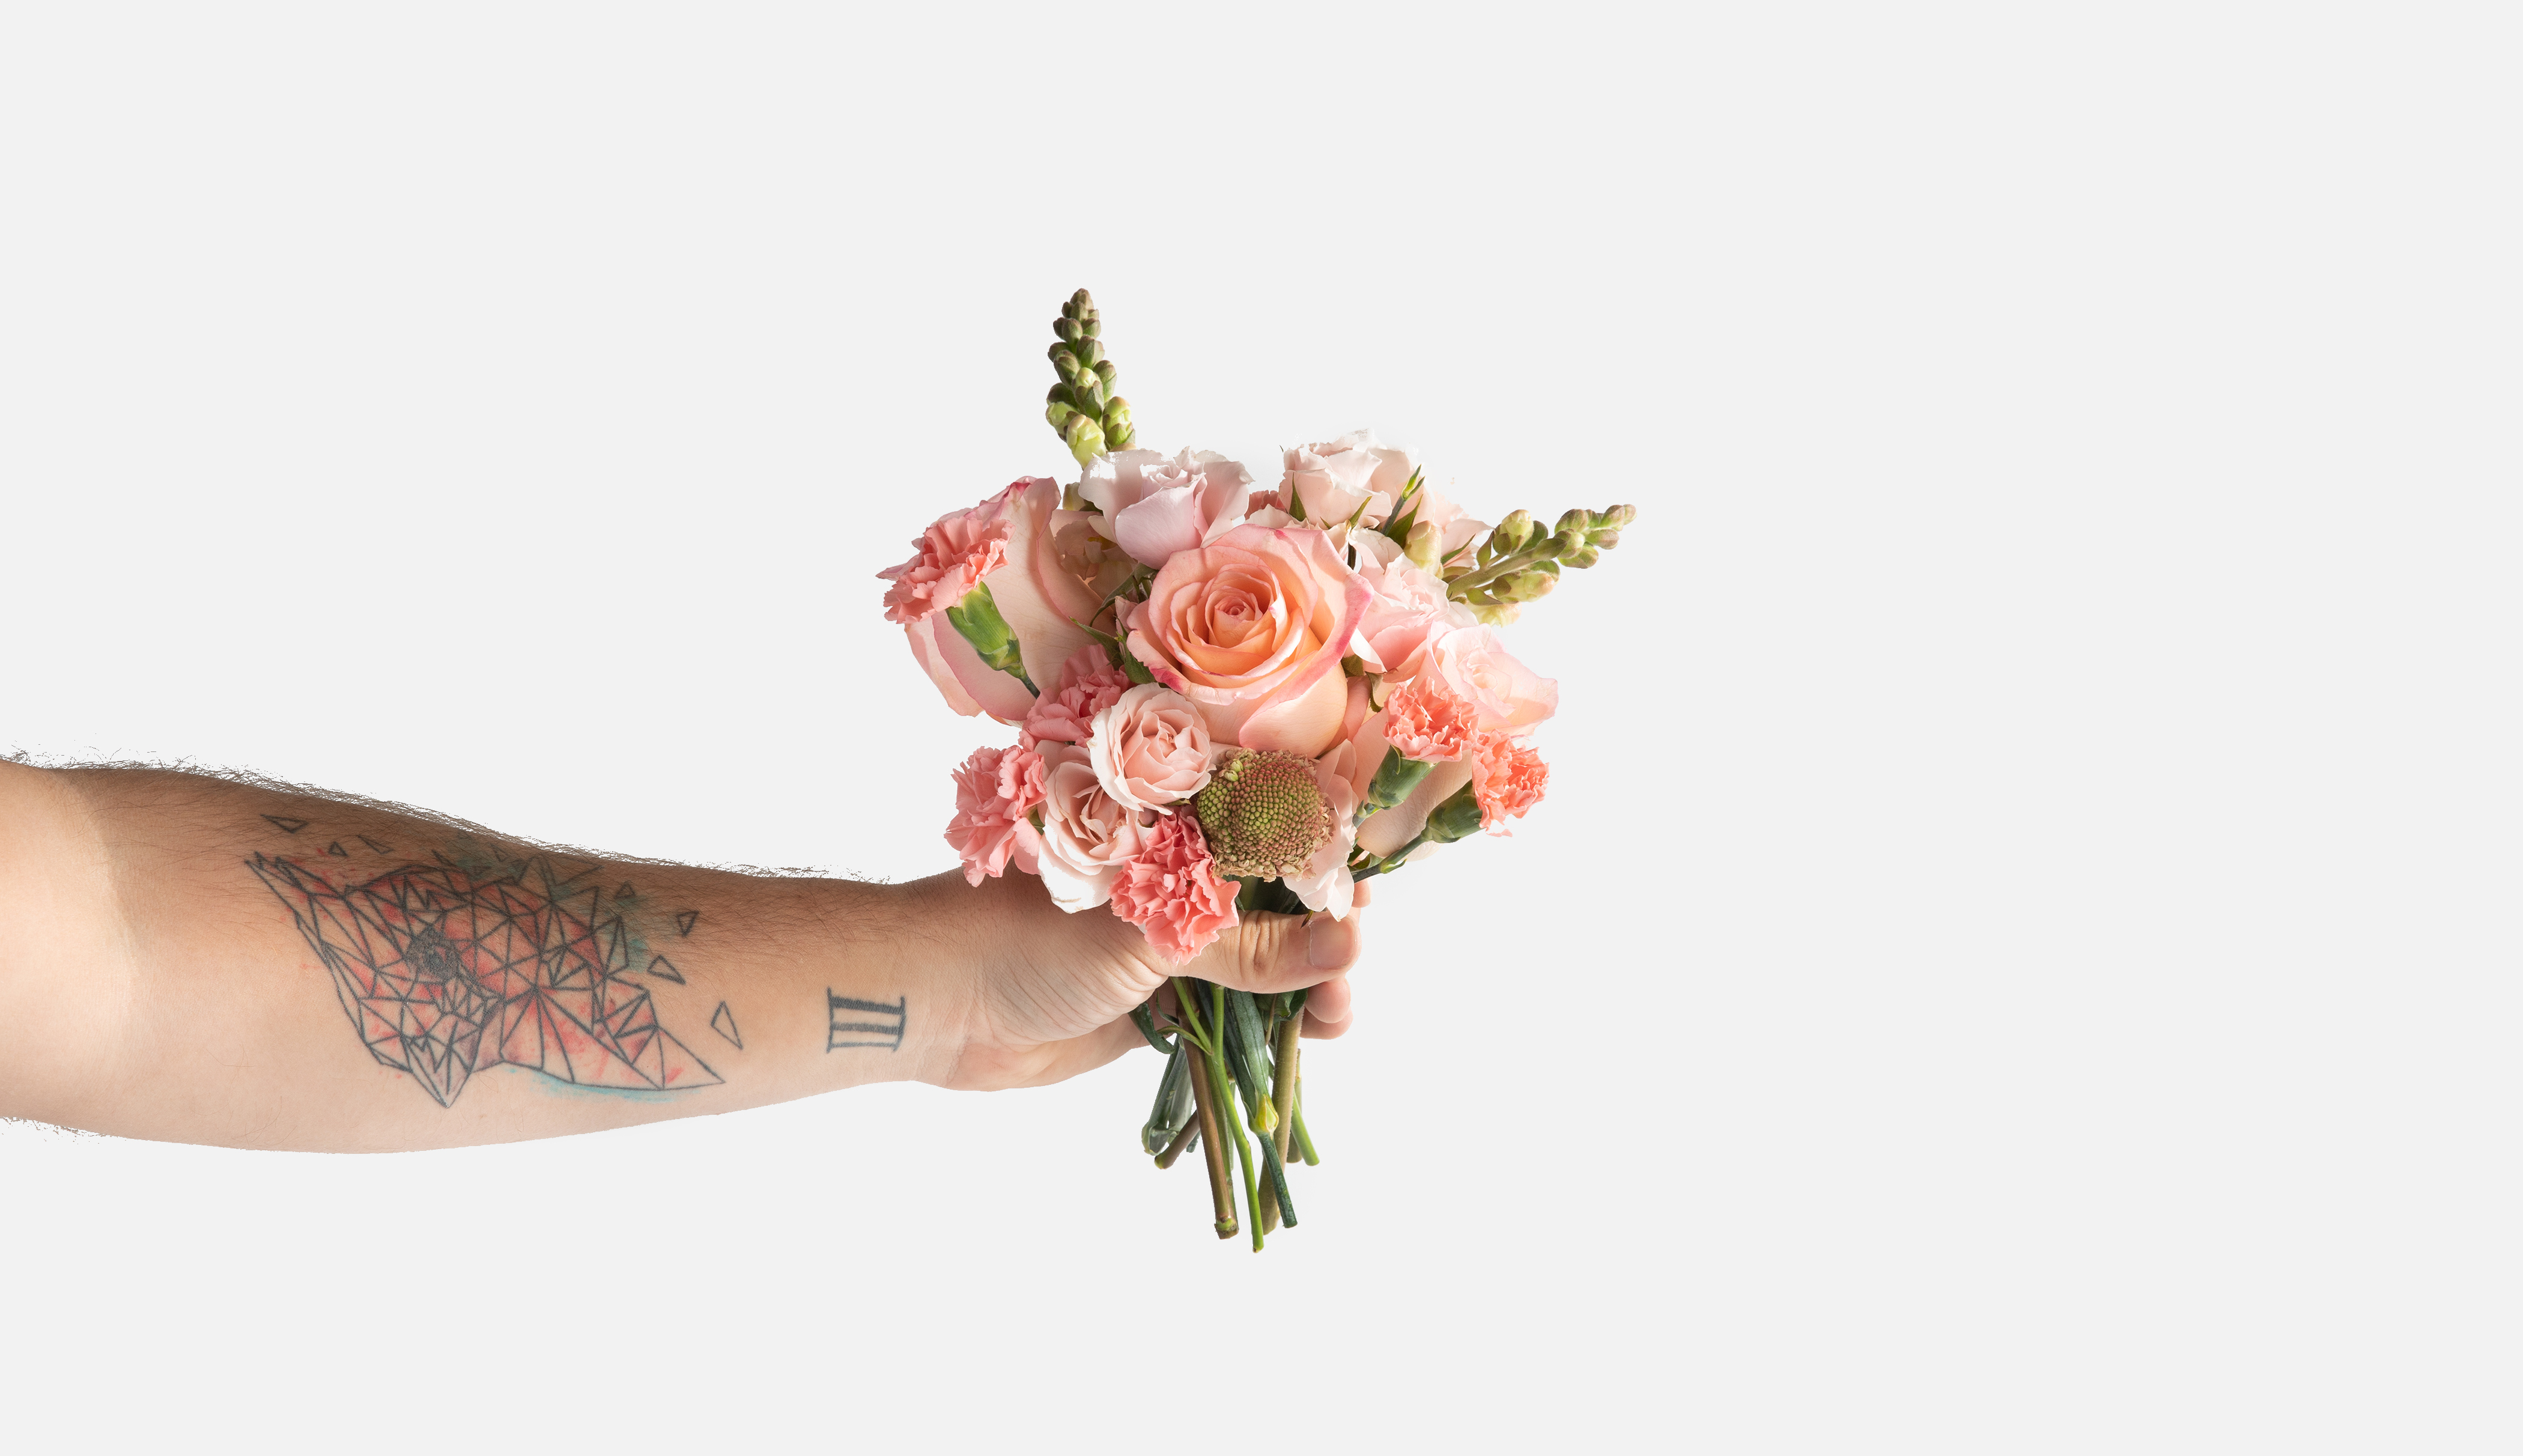 Hand holding a mini bouquet of pink flowers